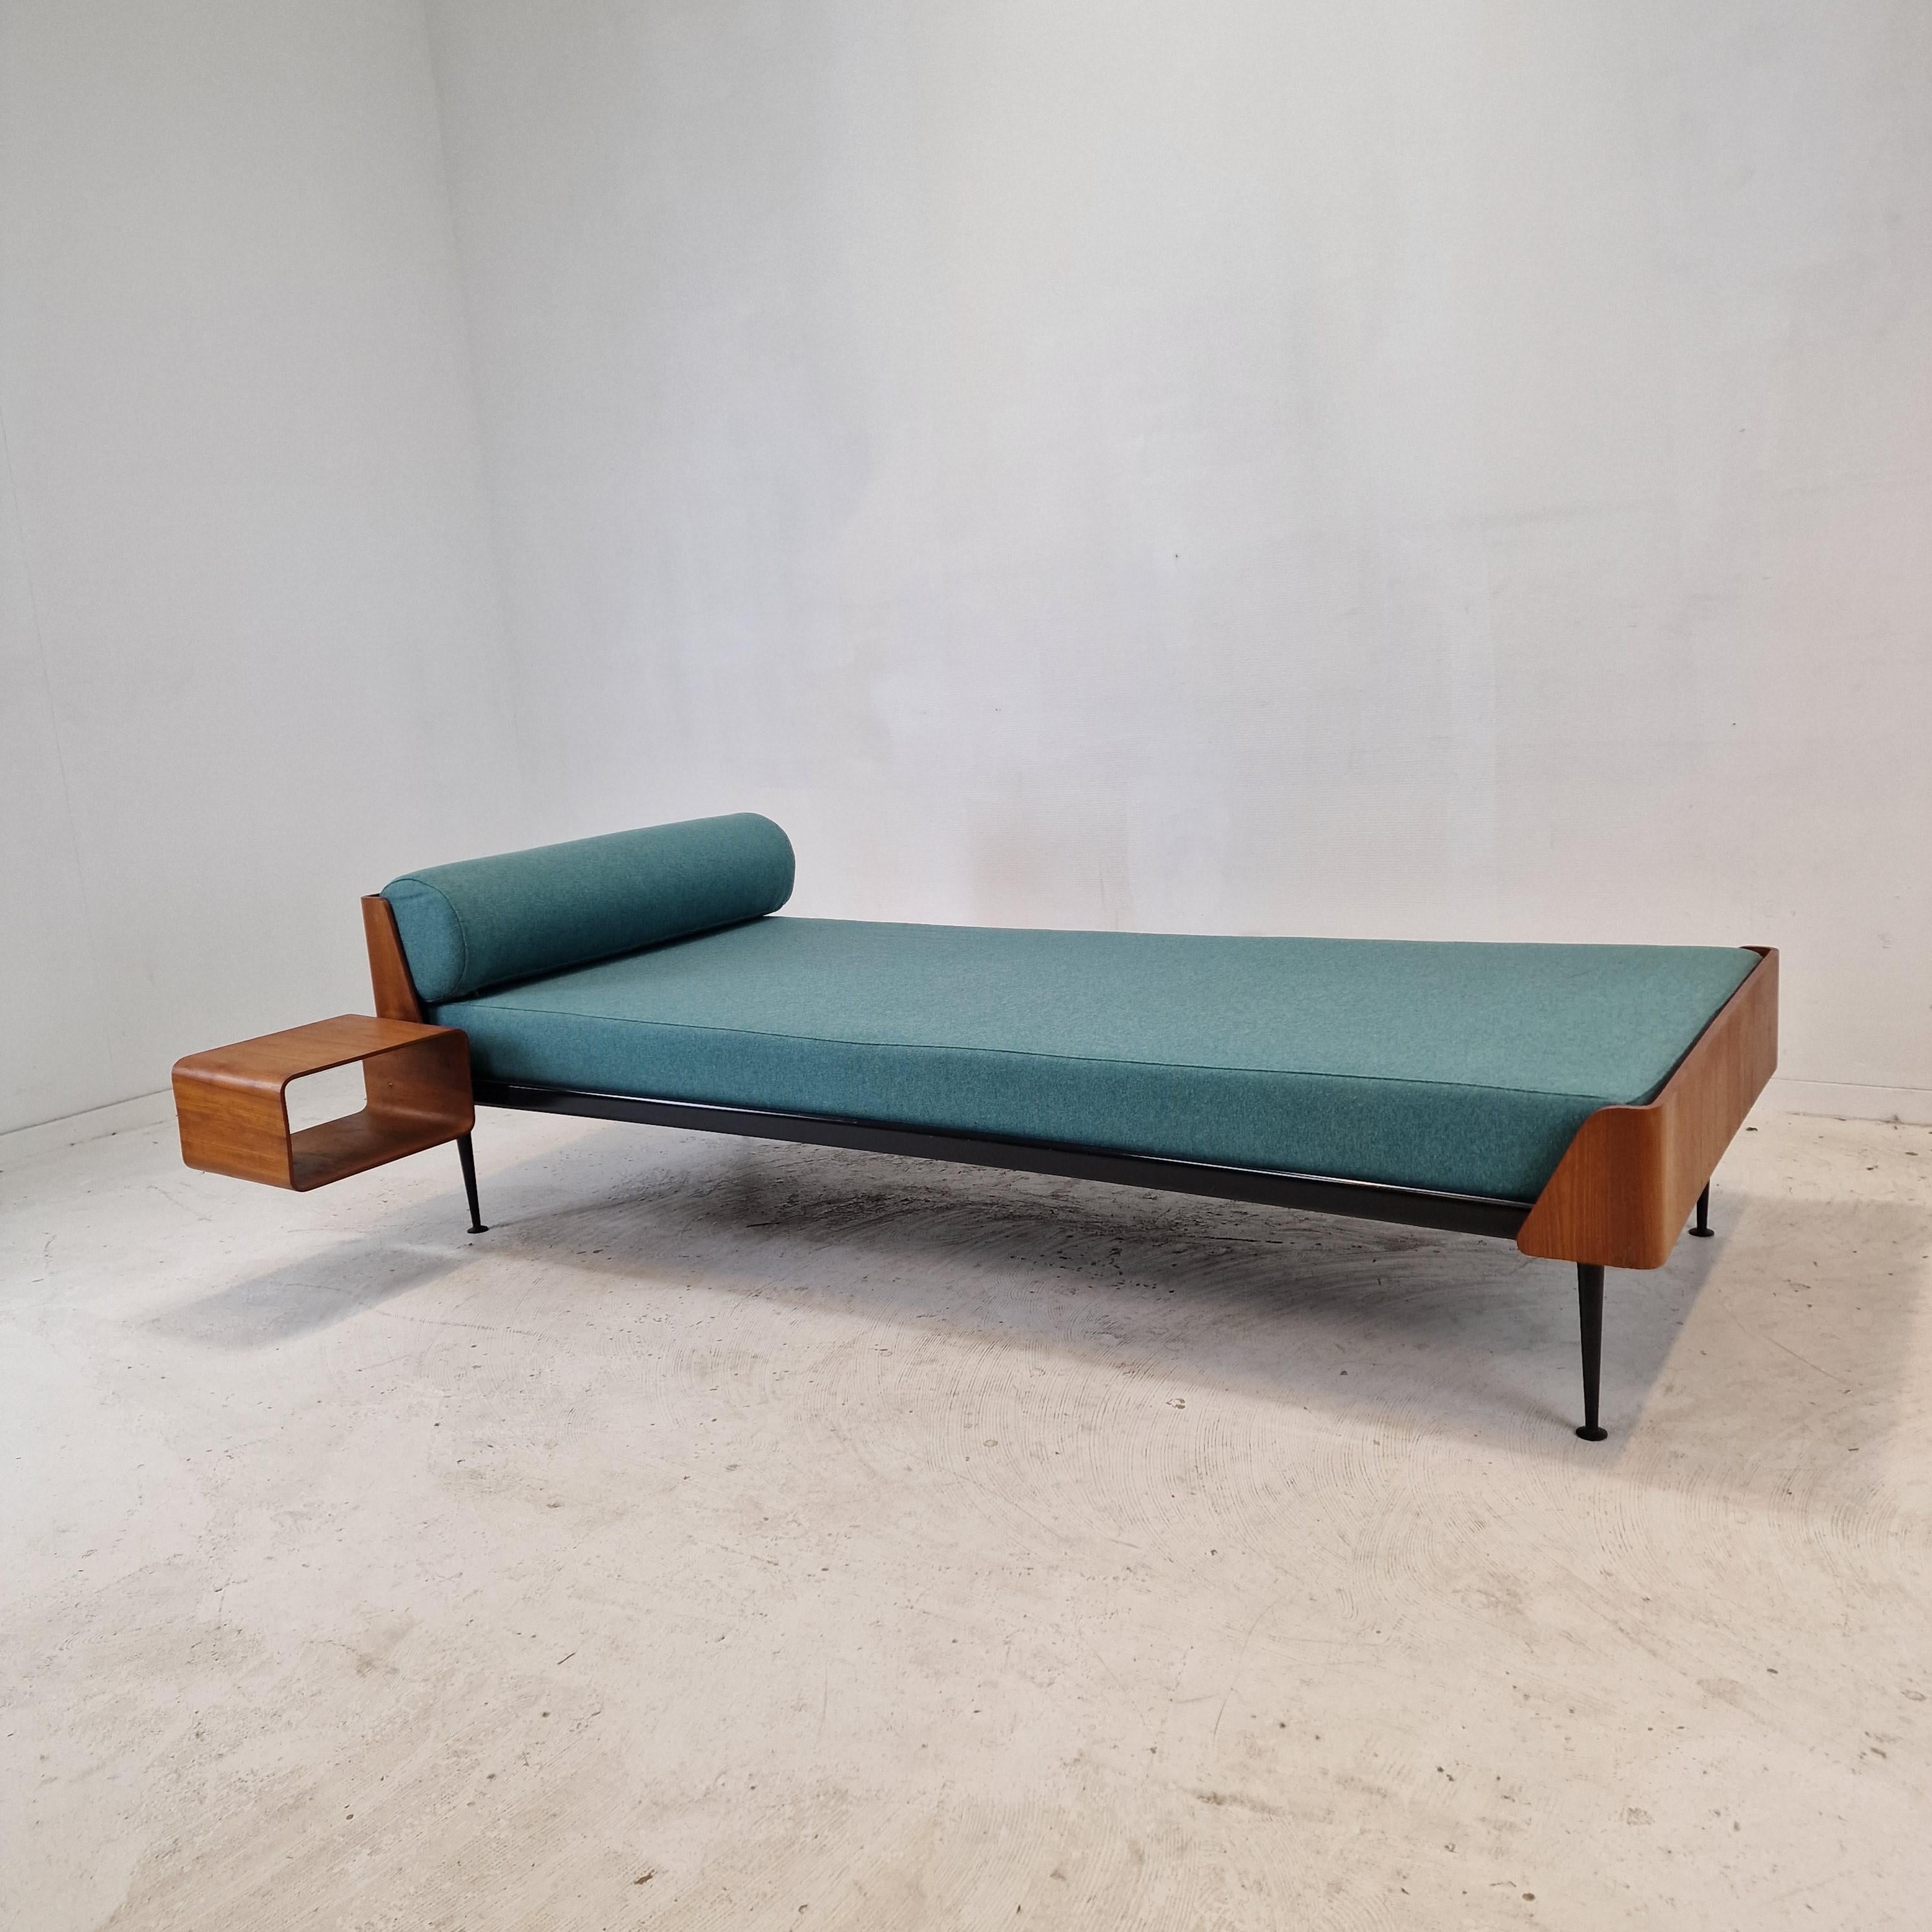 Very nice teak daybed, fabricated in The Netherlands in the 60's. 
This daybed is from the Euroika series designed by Friso Kramer in 1963. The Euroika series offered a bed, bed cabinets, tables, chairs, mirrors and a toilet cabinet!

This bed has a